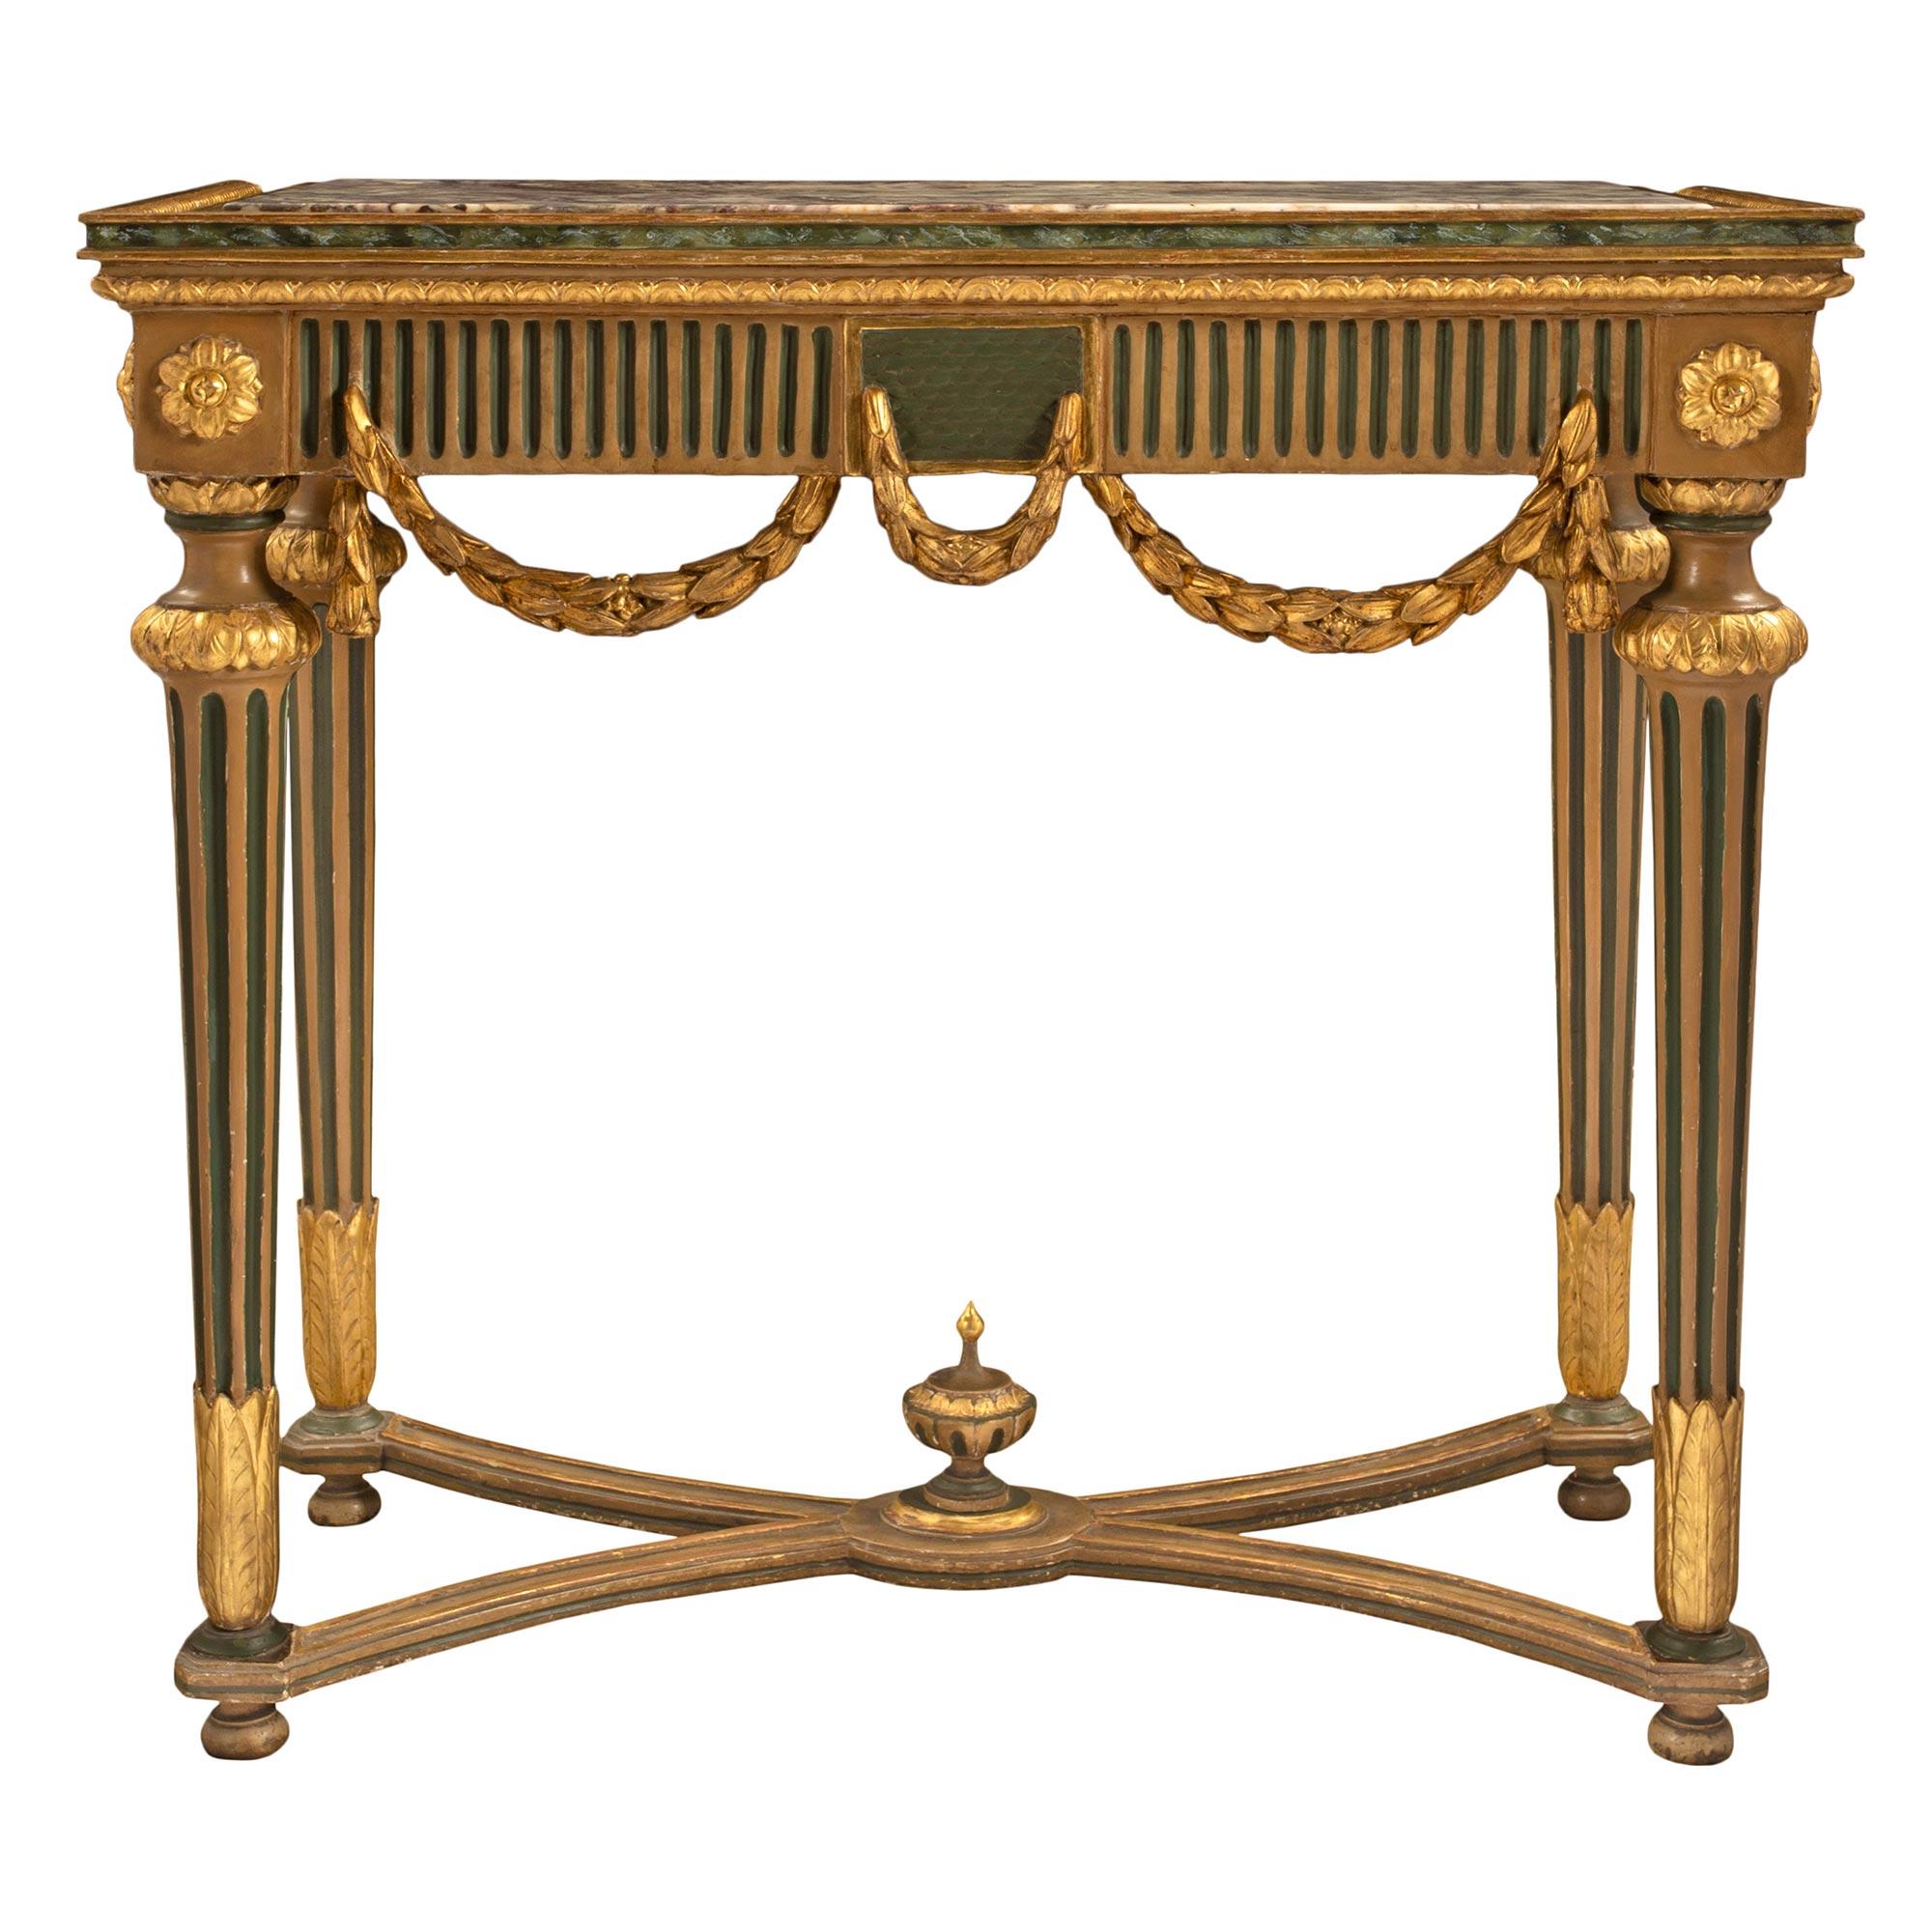 Italian 18th Century Louis XVI Period Giltwood and Marble Console For Sale